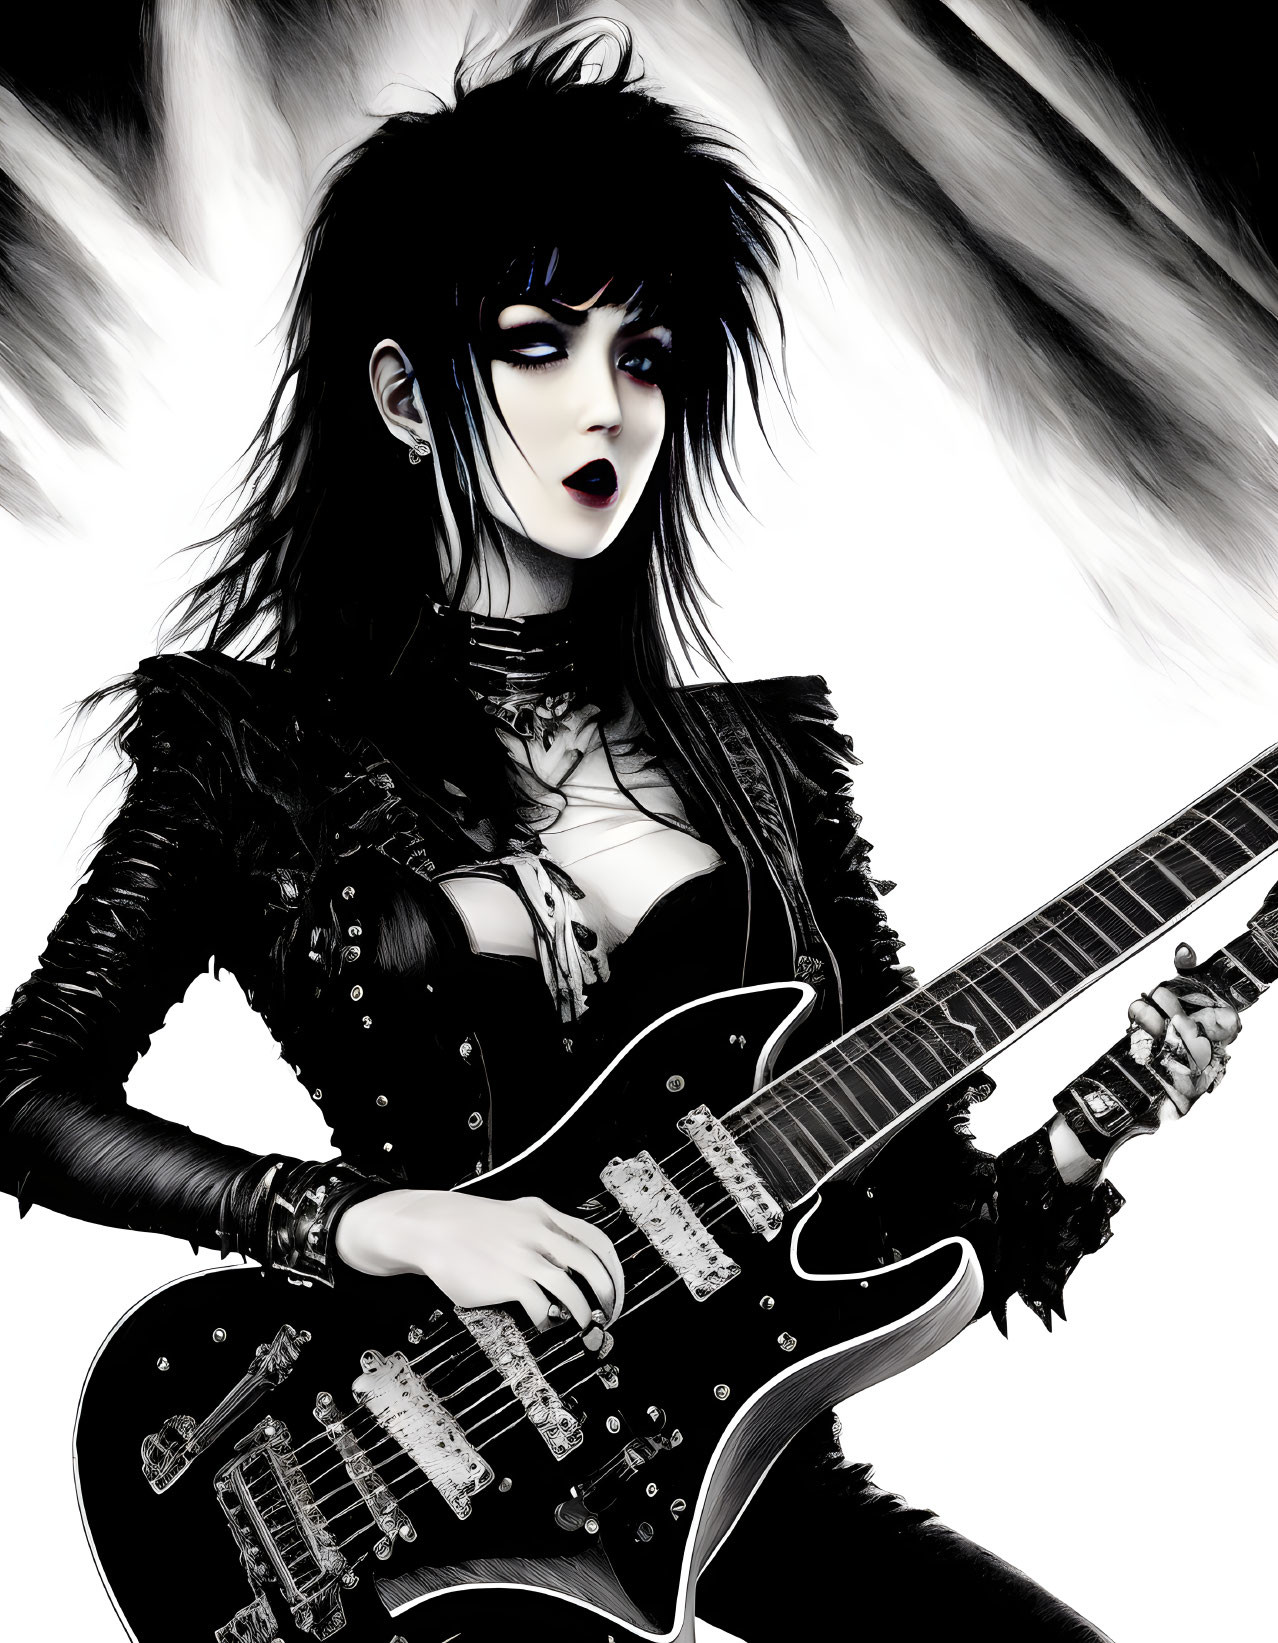 Gothic-style female character with dark makeup playing black electric guitar